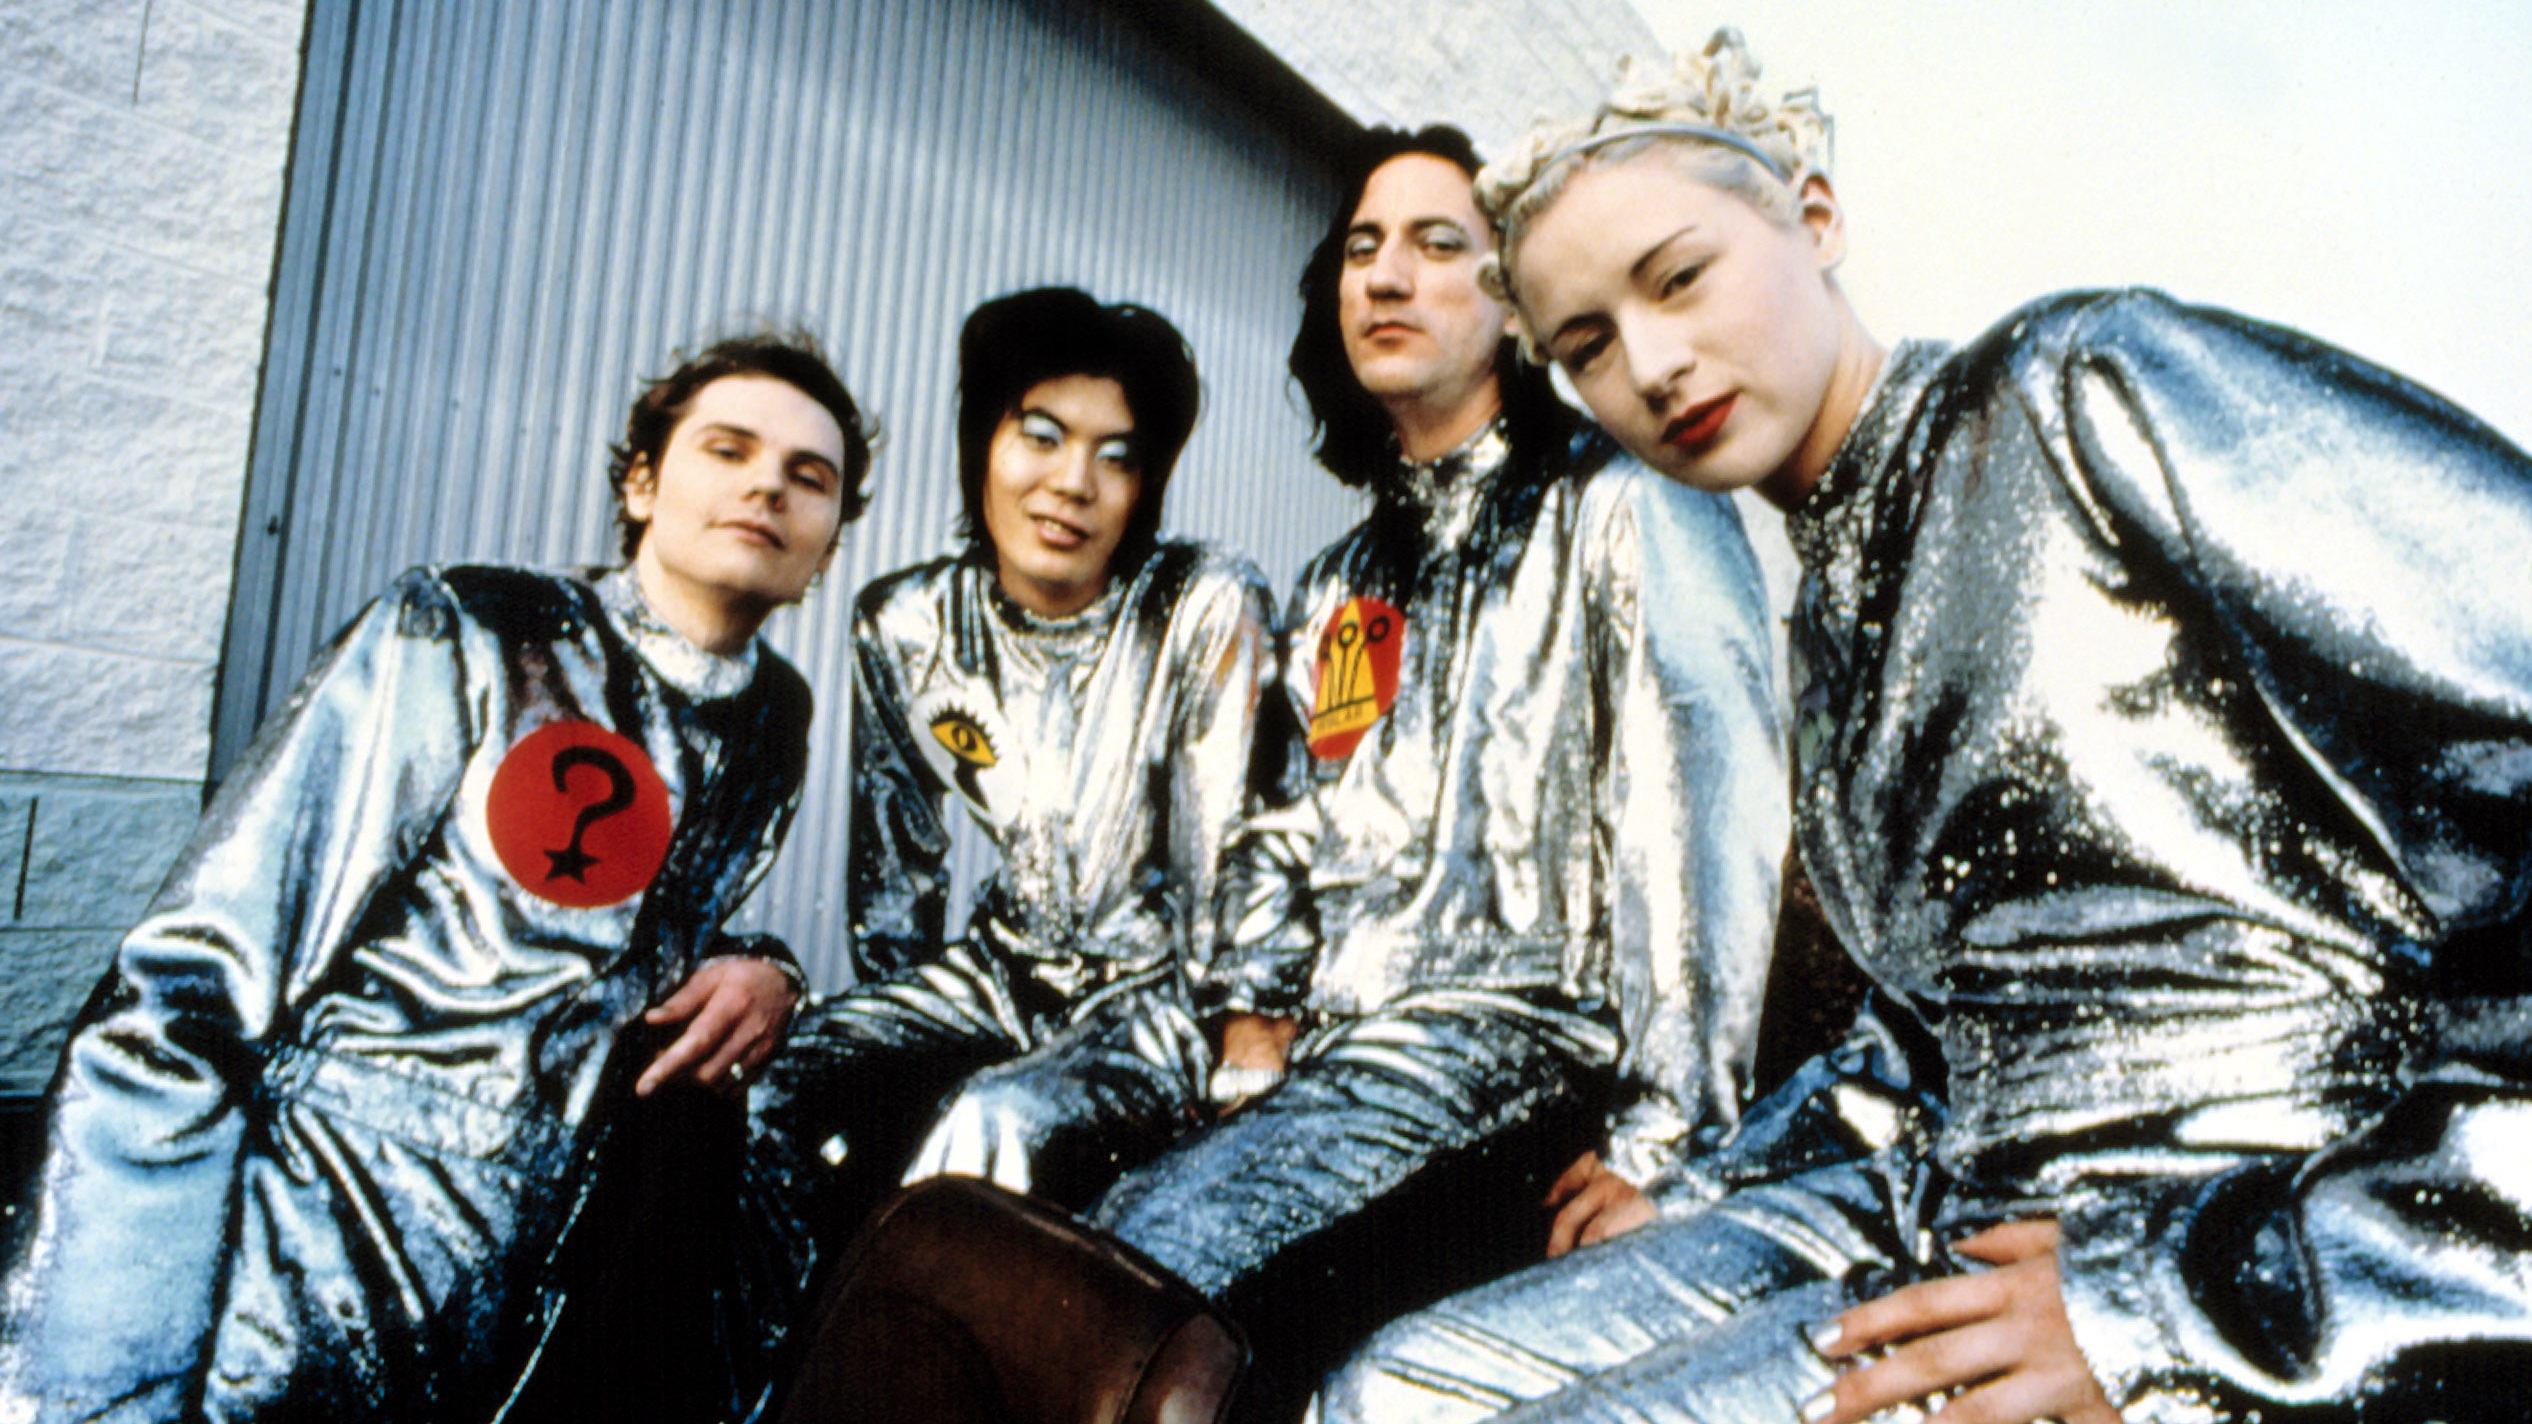 The Smashing Pumpkins in the early 1990s: Billy Corgan, James Iha, Jimmy Chamberlin and D’arcy Wretzky